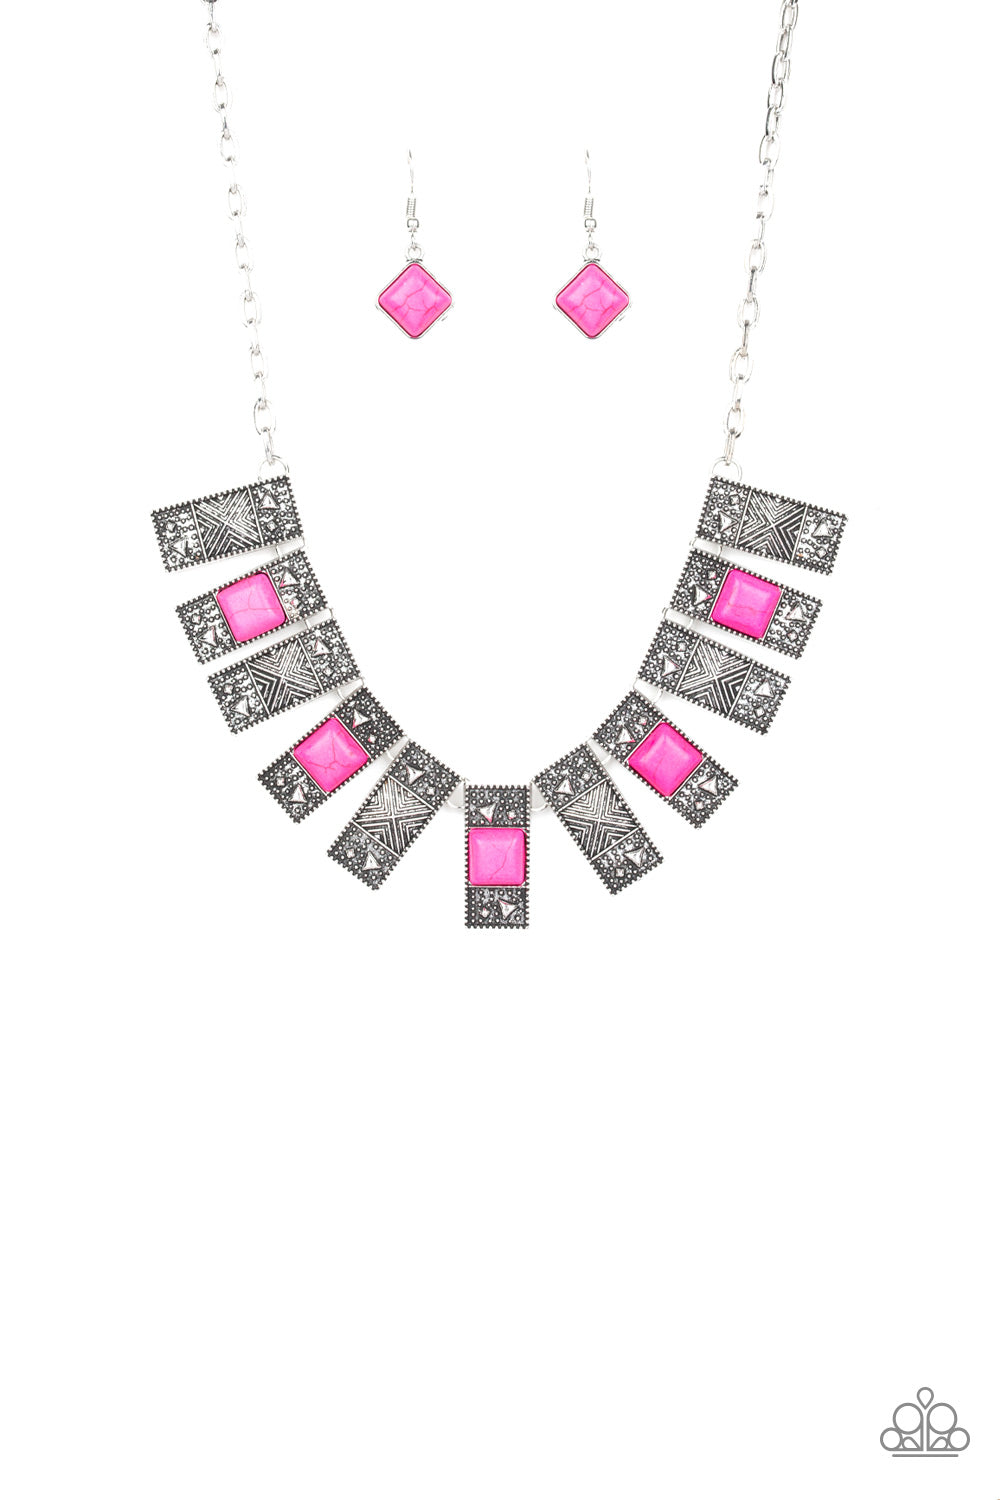 The MANE Contender Pink Paparazzi Necklaces Cashmere Pink Jewels - Cashmere Pink Jewels & Accessories, Cashmere Pink Jewels & Accessories - Paparazzi